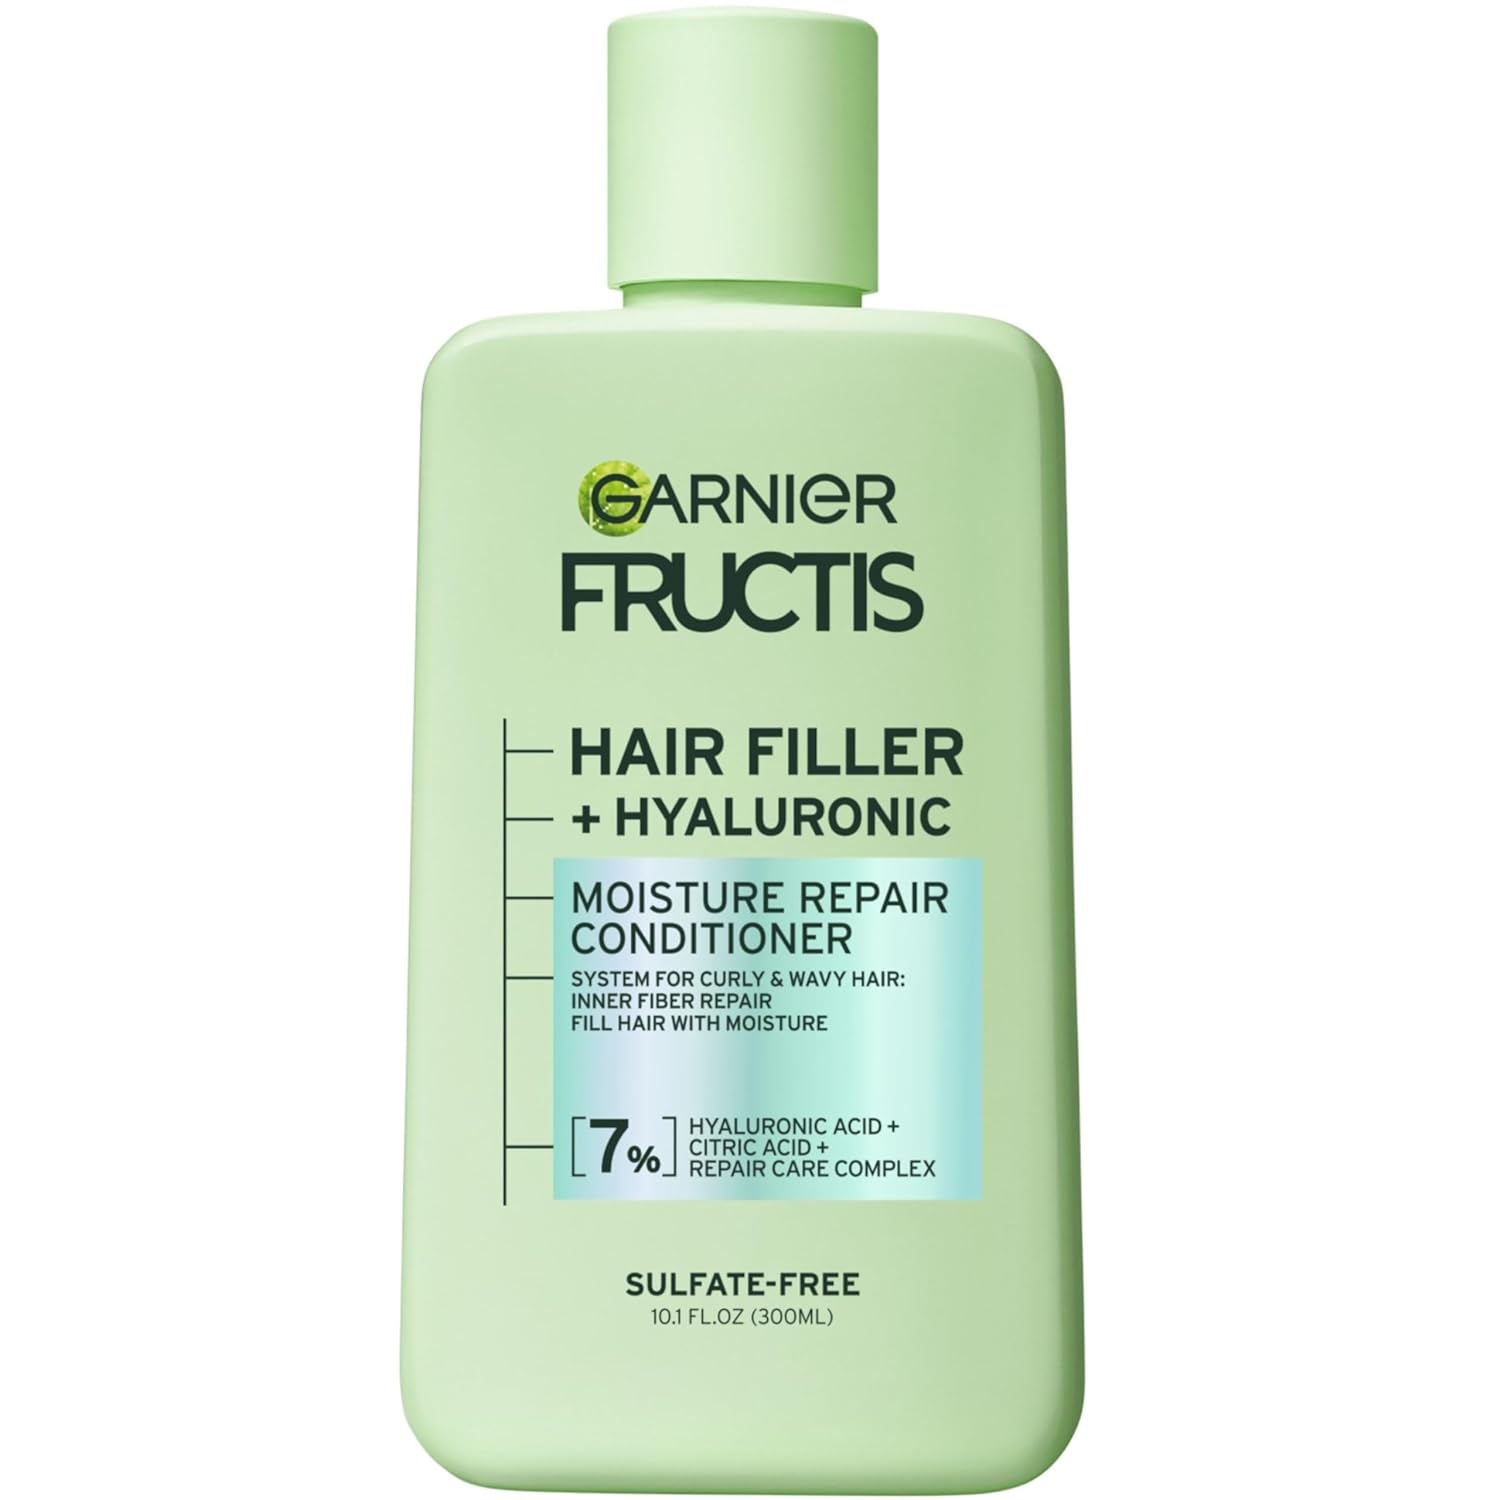 Garnier Fructis Hair Filler Moisture Repair Conditioner for Curly, Wavy Hair, with Hyaluronic Acid, 10.1 FL OZ, 1 Count